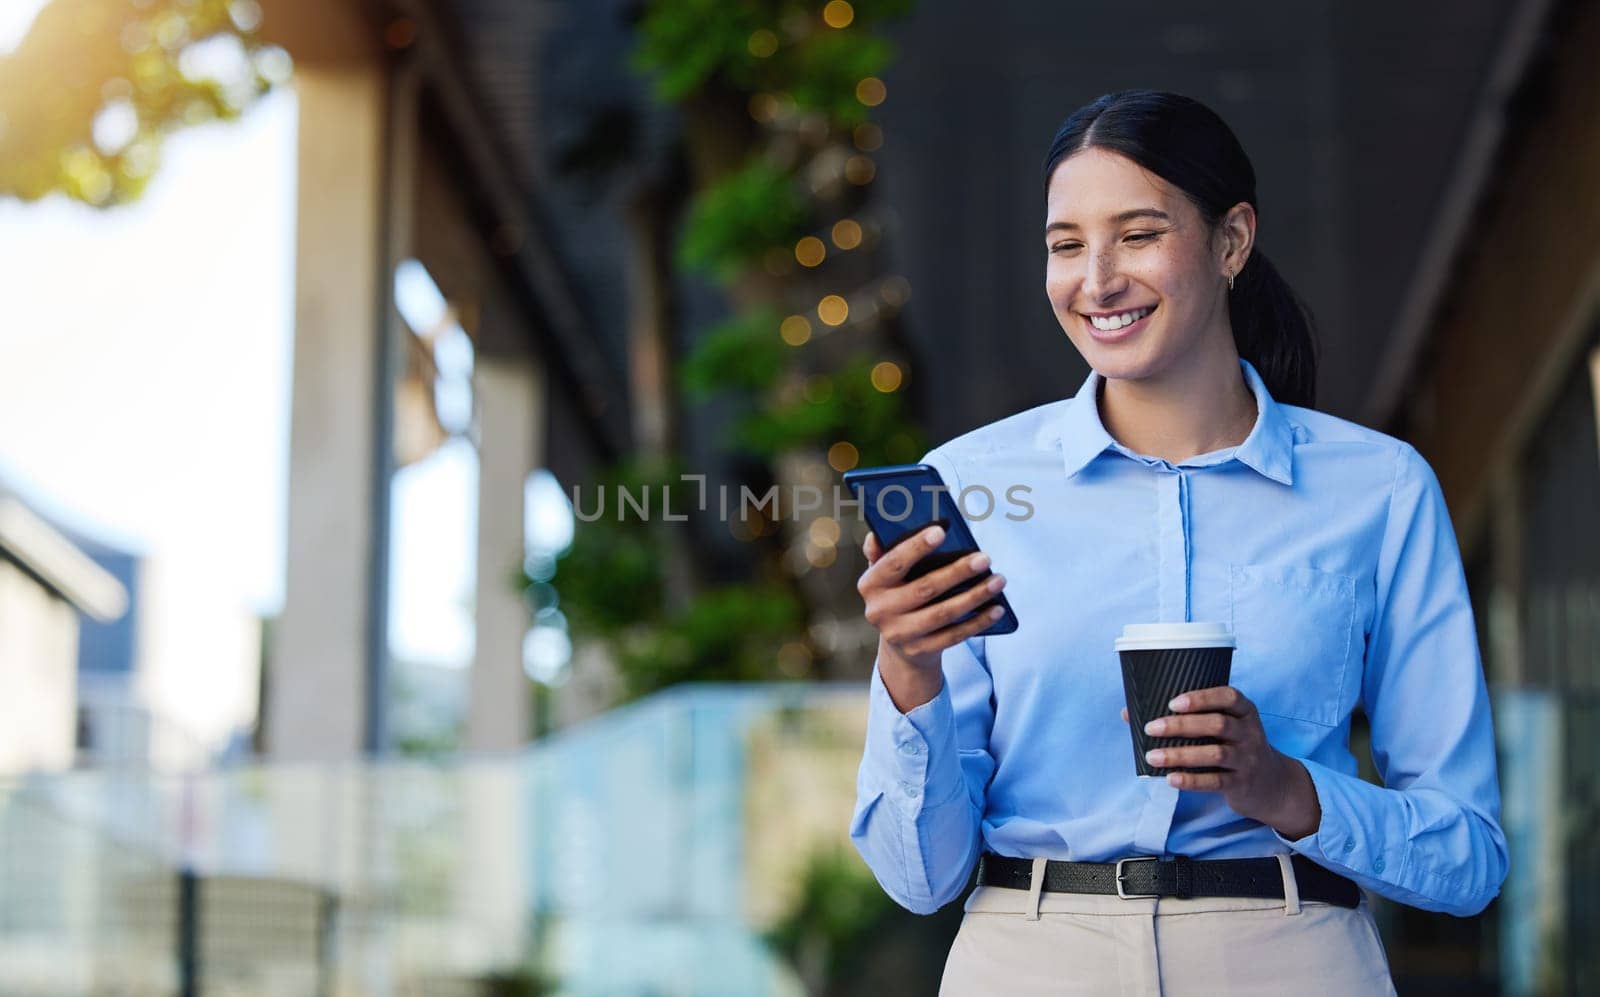 Phone, coffee and business woman in city for communication, social media or networking outdoor. Professional person on mobile, internet or reading email, Web 3.0 and news of job or career opportunity by YuriArcurs